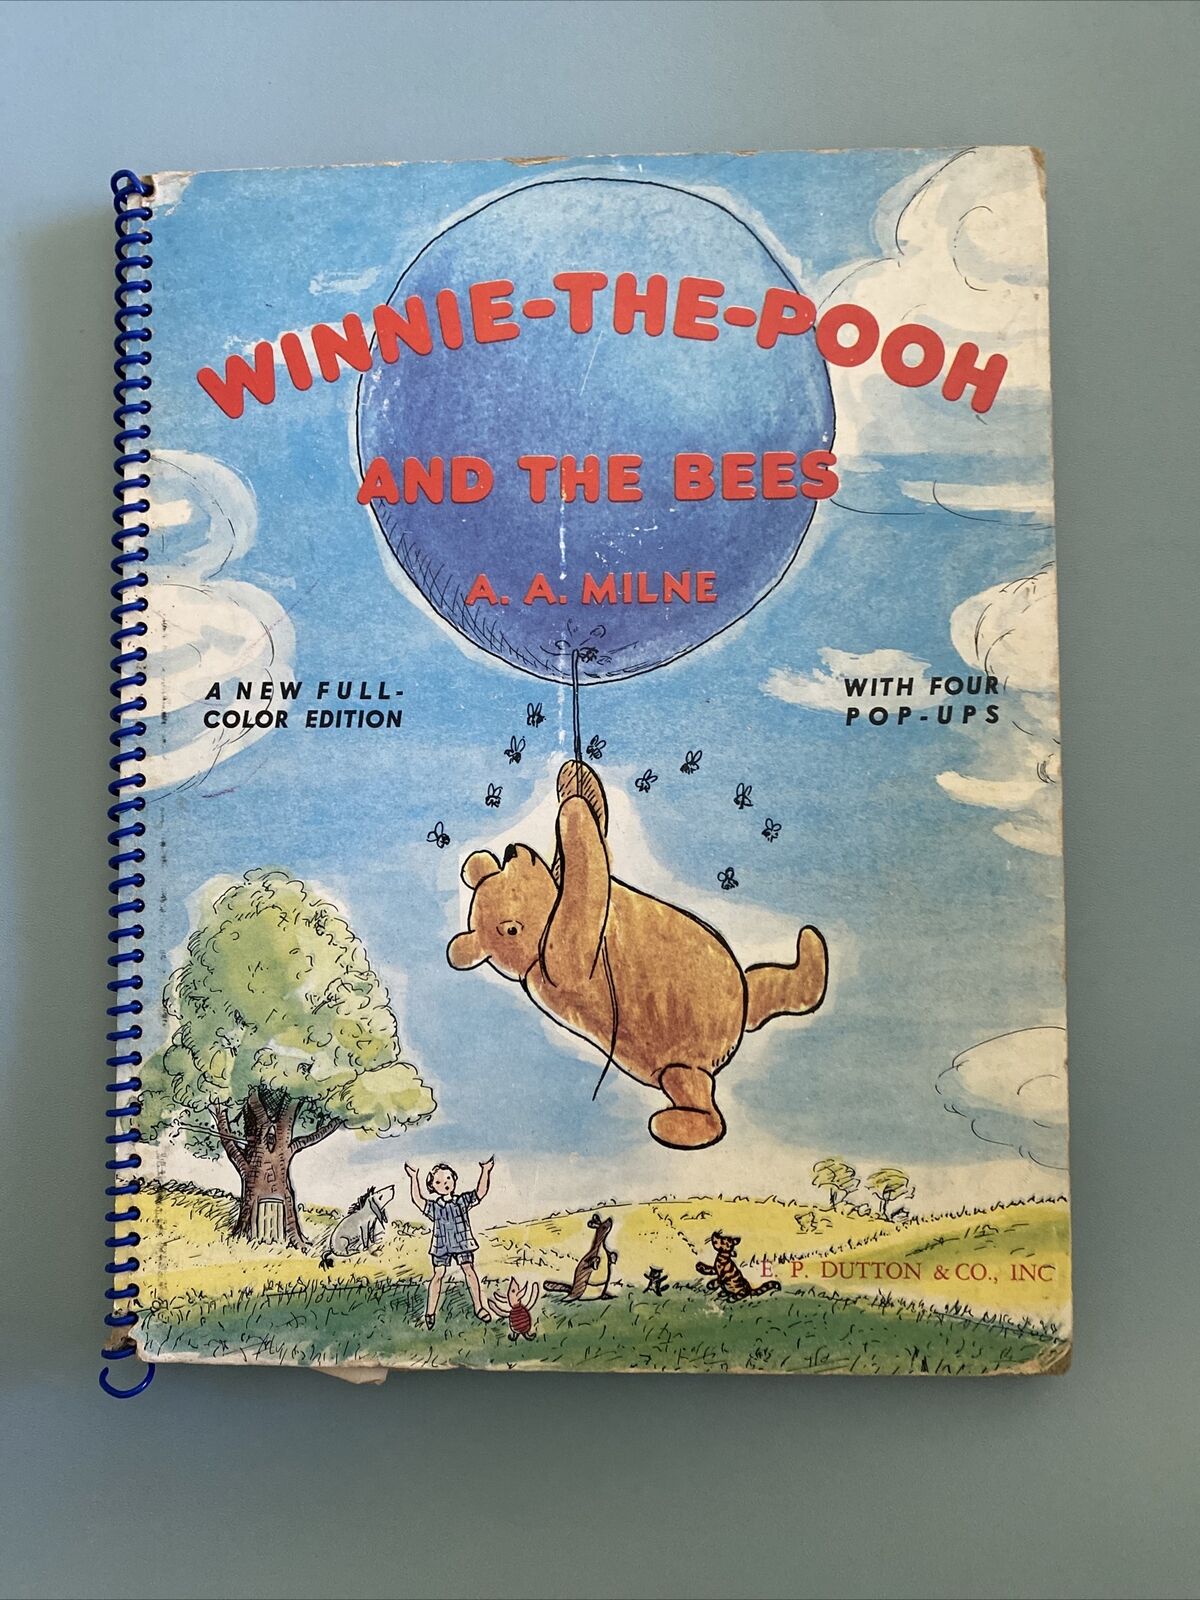 Vintage “Winnie-The-Pooh And The Bees” Children’s Book